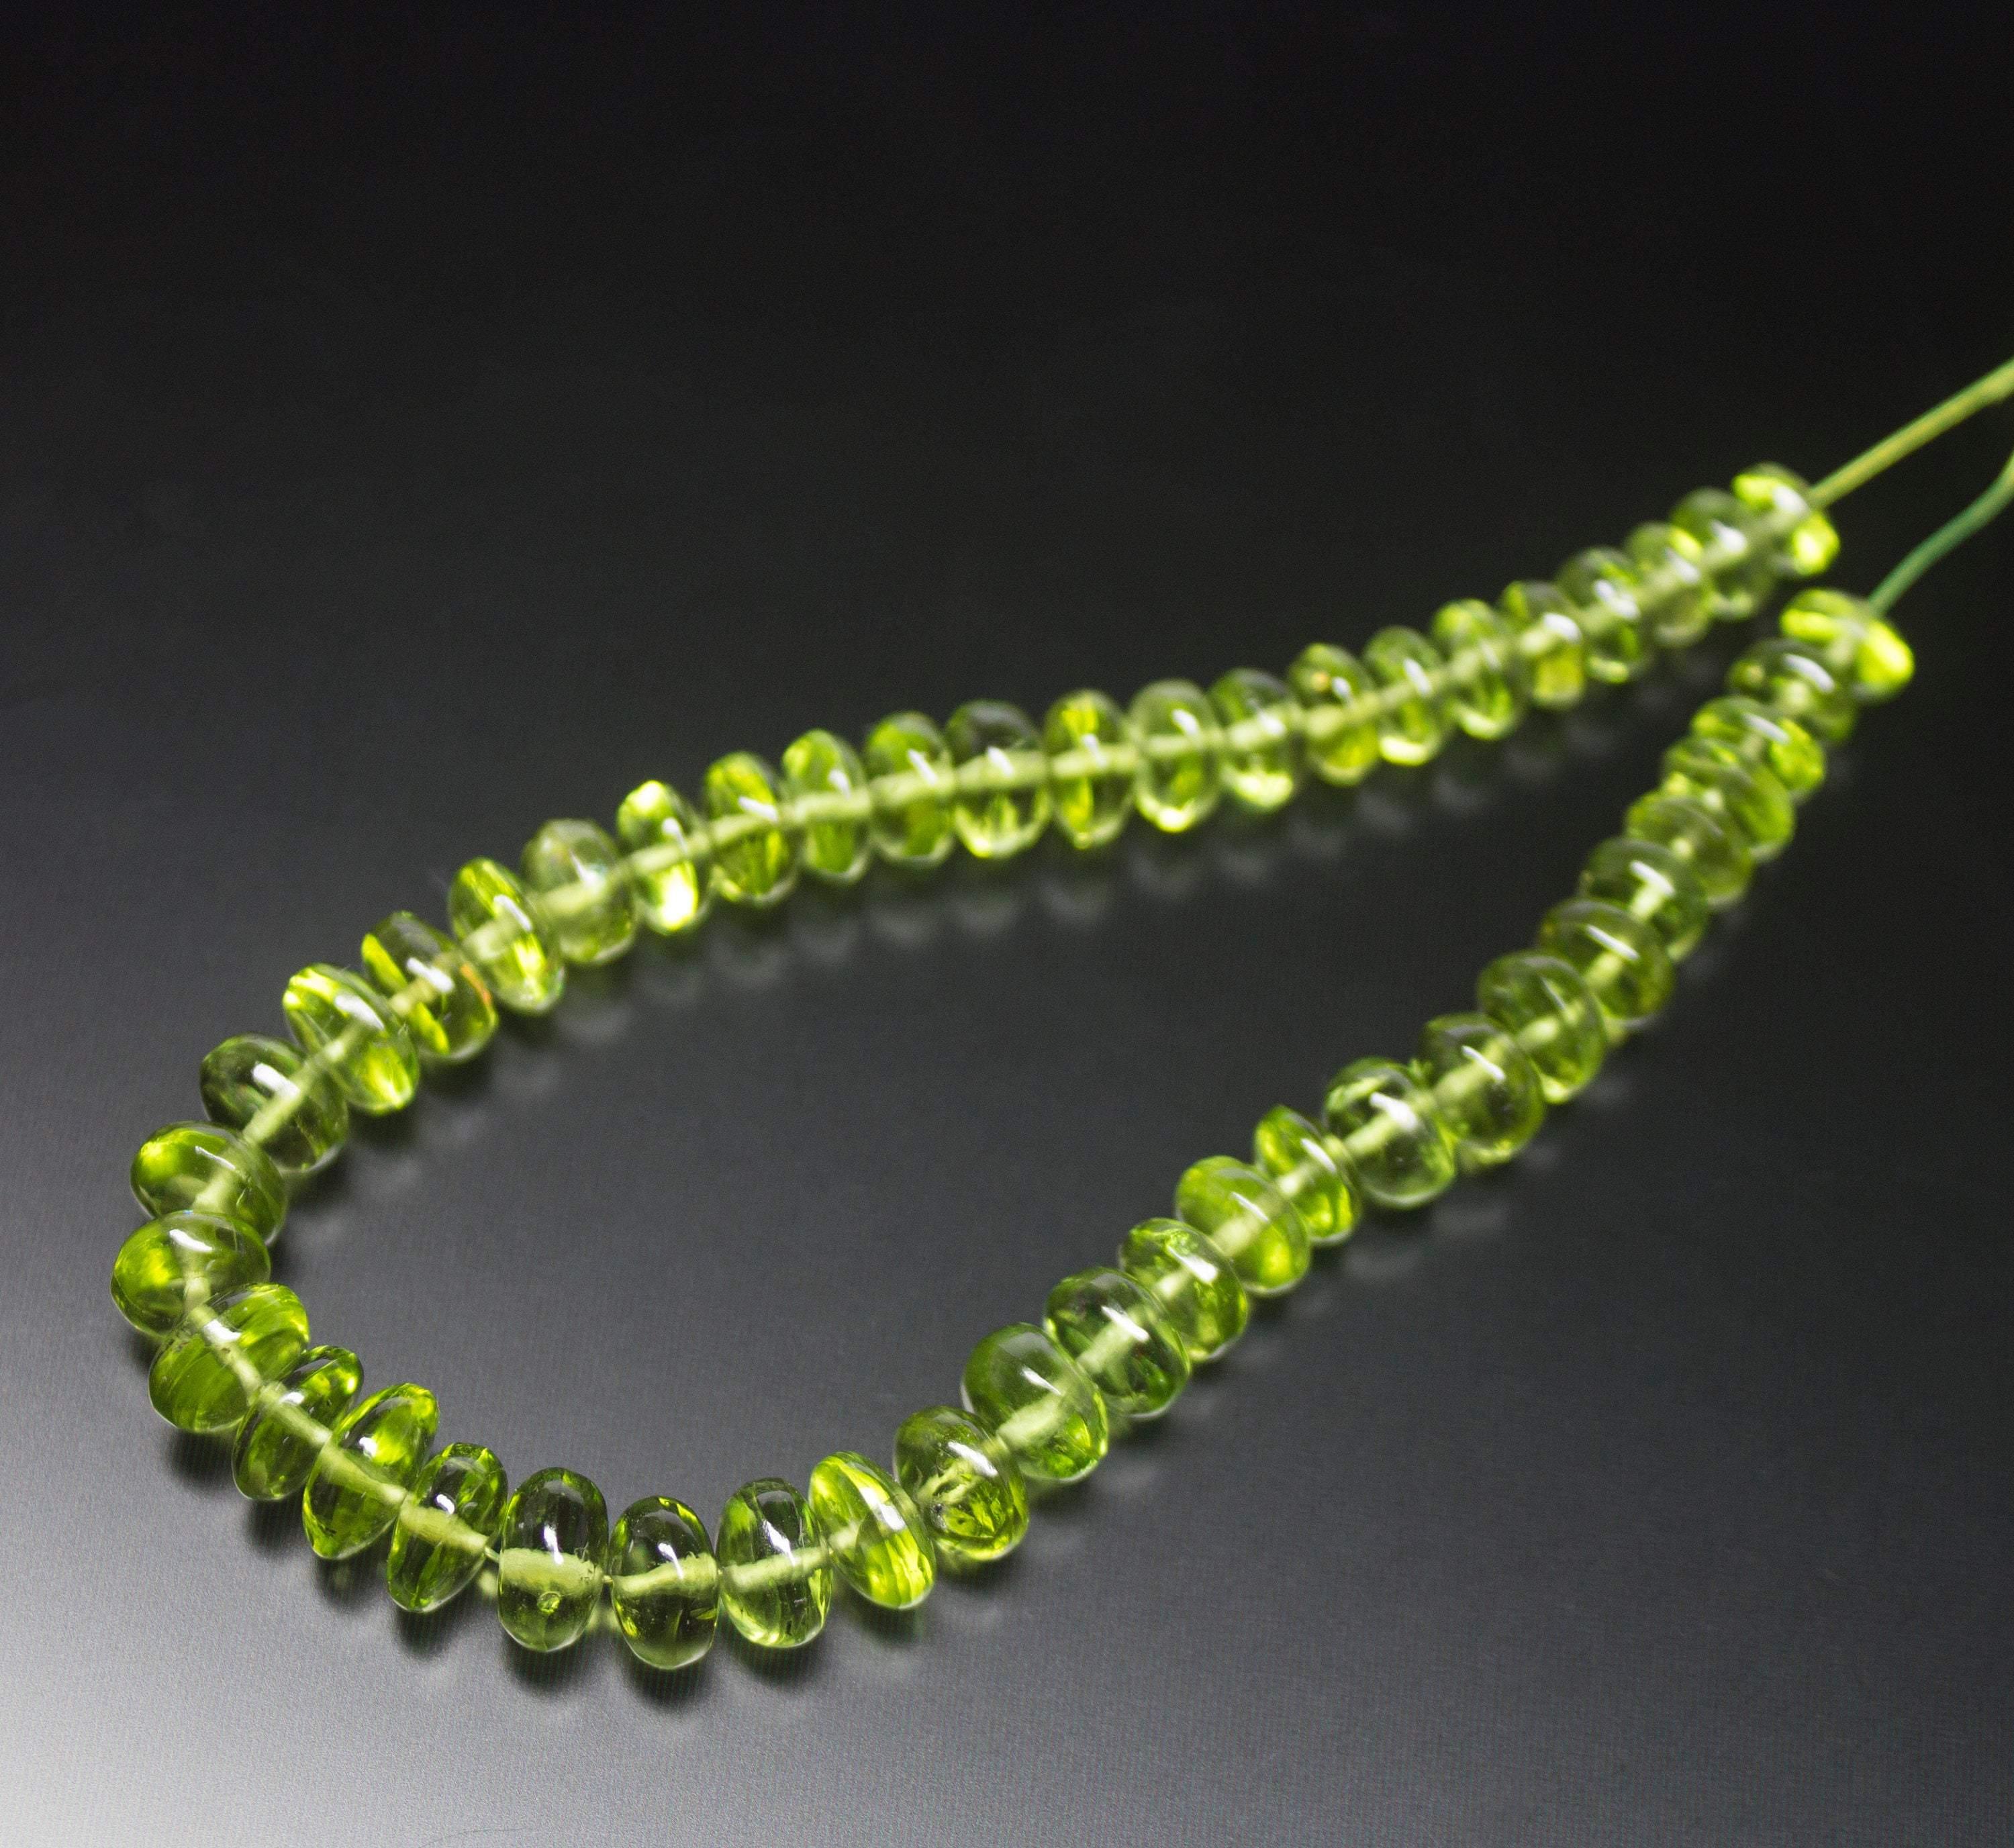 ON SALE - 4-8mm Natural AAA Peridot Faceted Rondelle Beads Necklace